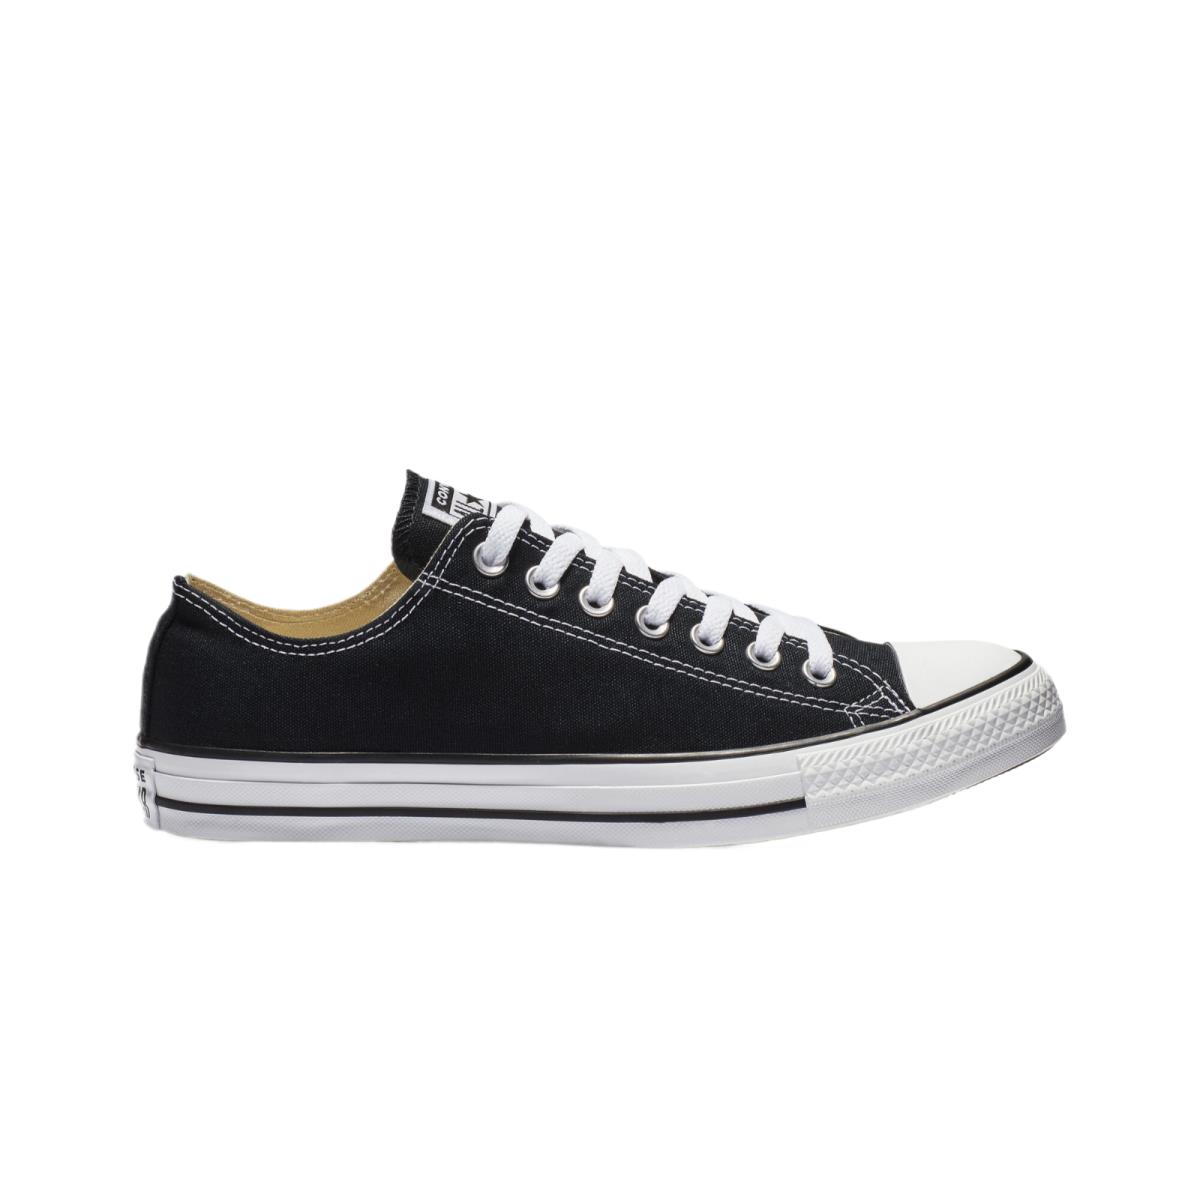 Converse Adult Unisex Chuck Taylor All Star Ox Low Top Black/white M9166/M9166C